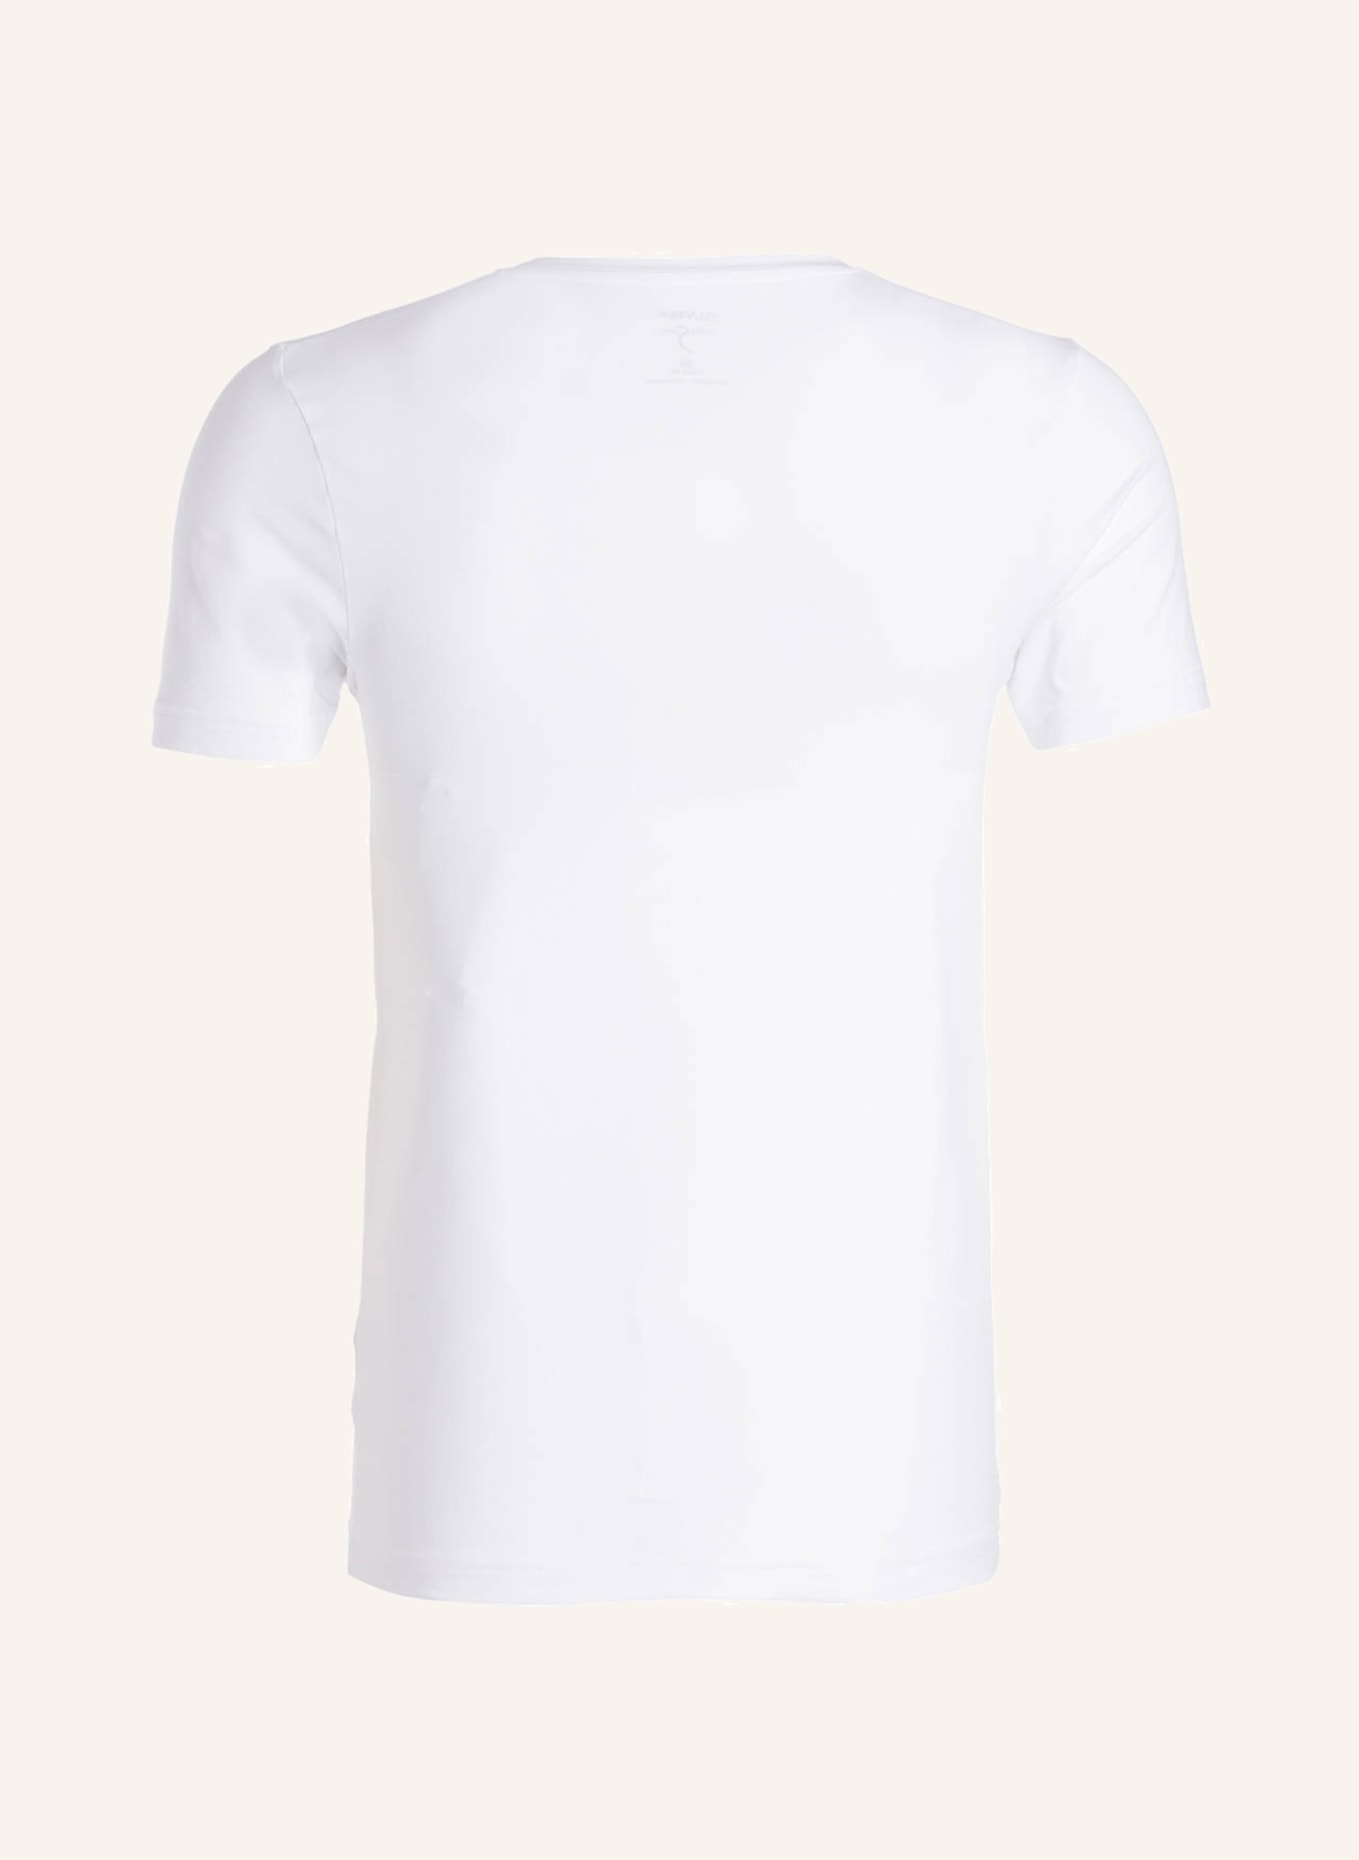 OLYMP T-Shirt Level Five body weiss in fit